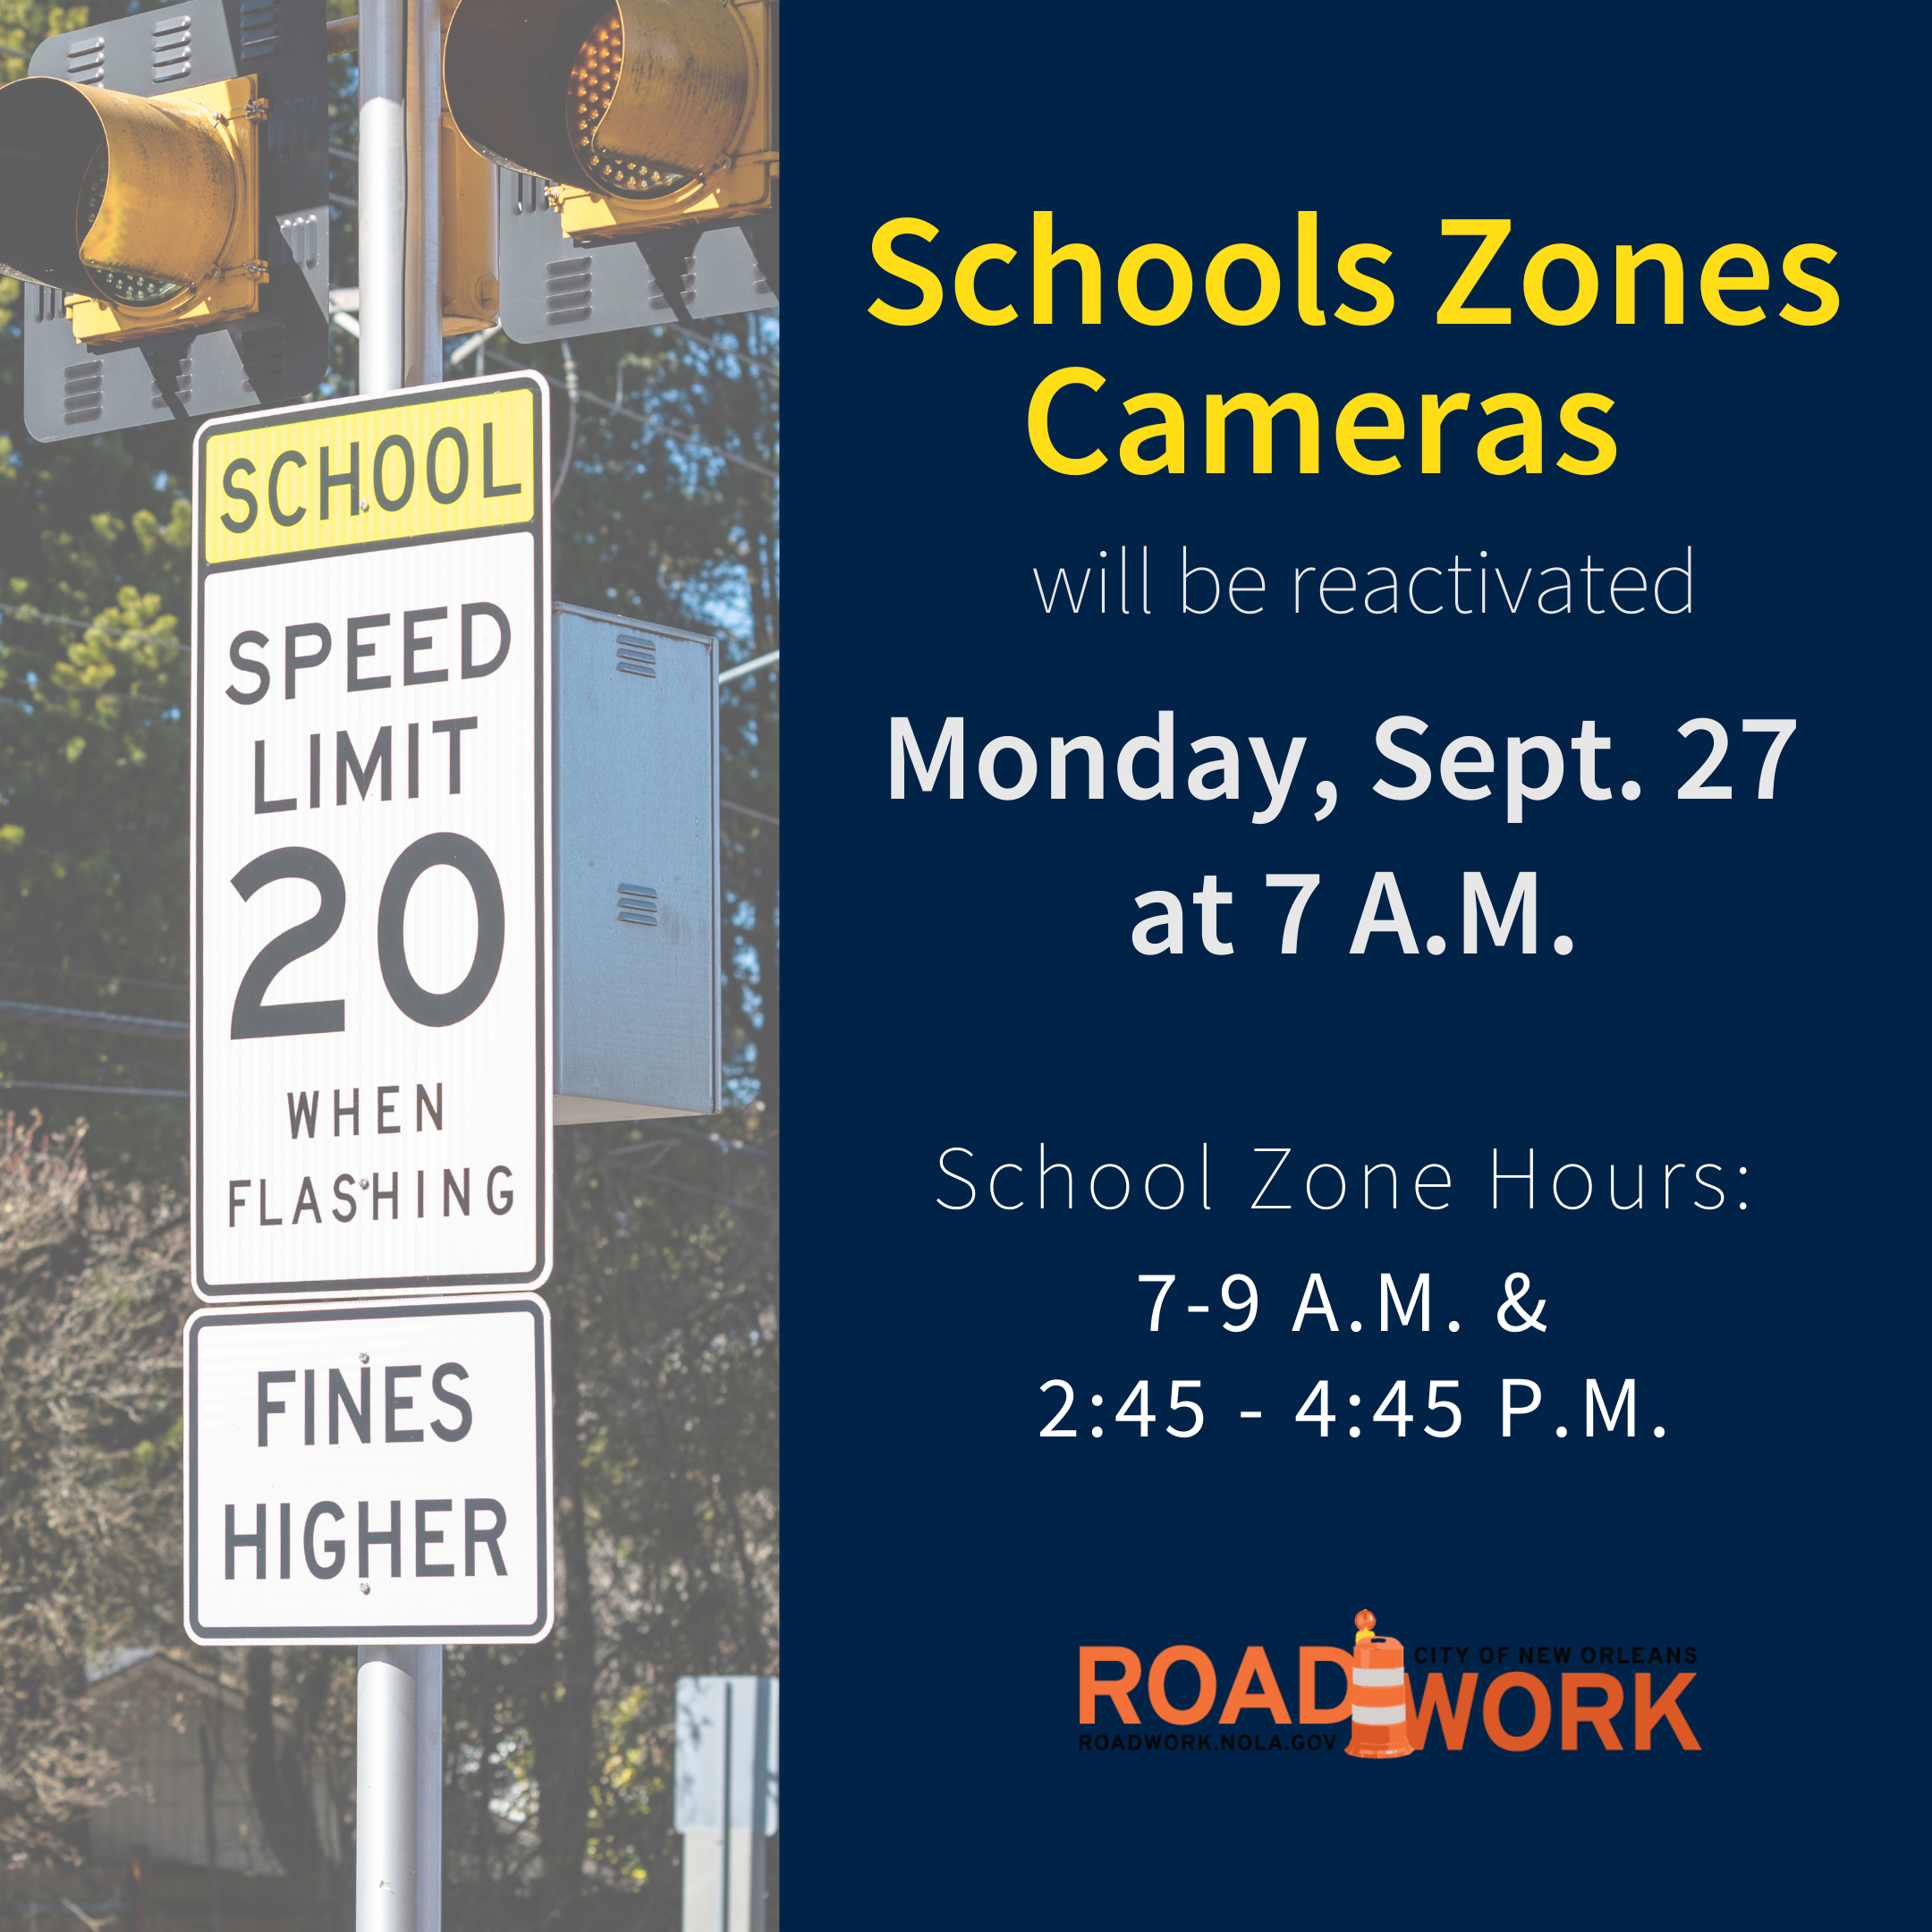 City of New Orleans to Reactivate School Zone Safety Cameras on Monday